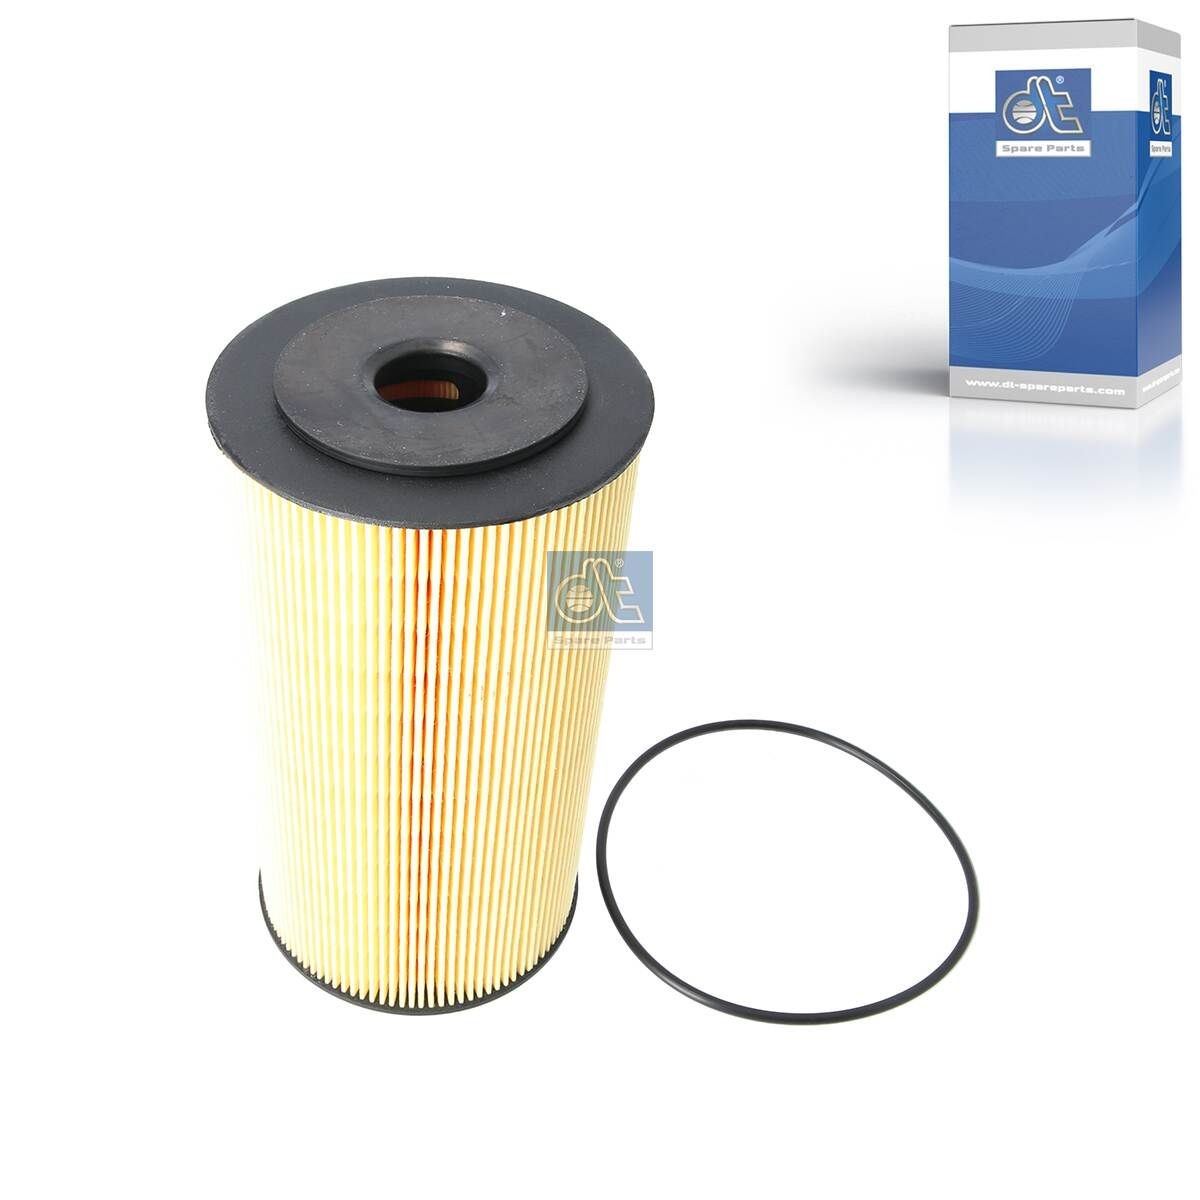 E360H D307 DT Spare Parts with seal ring, Filter Insert Oil filters 2.11134 buy